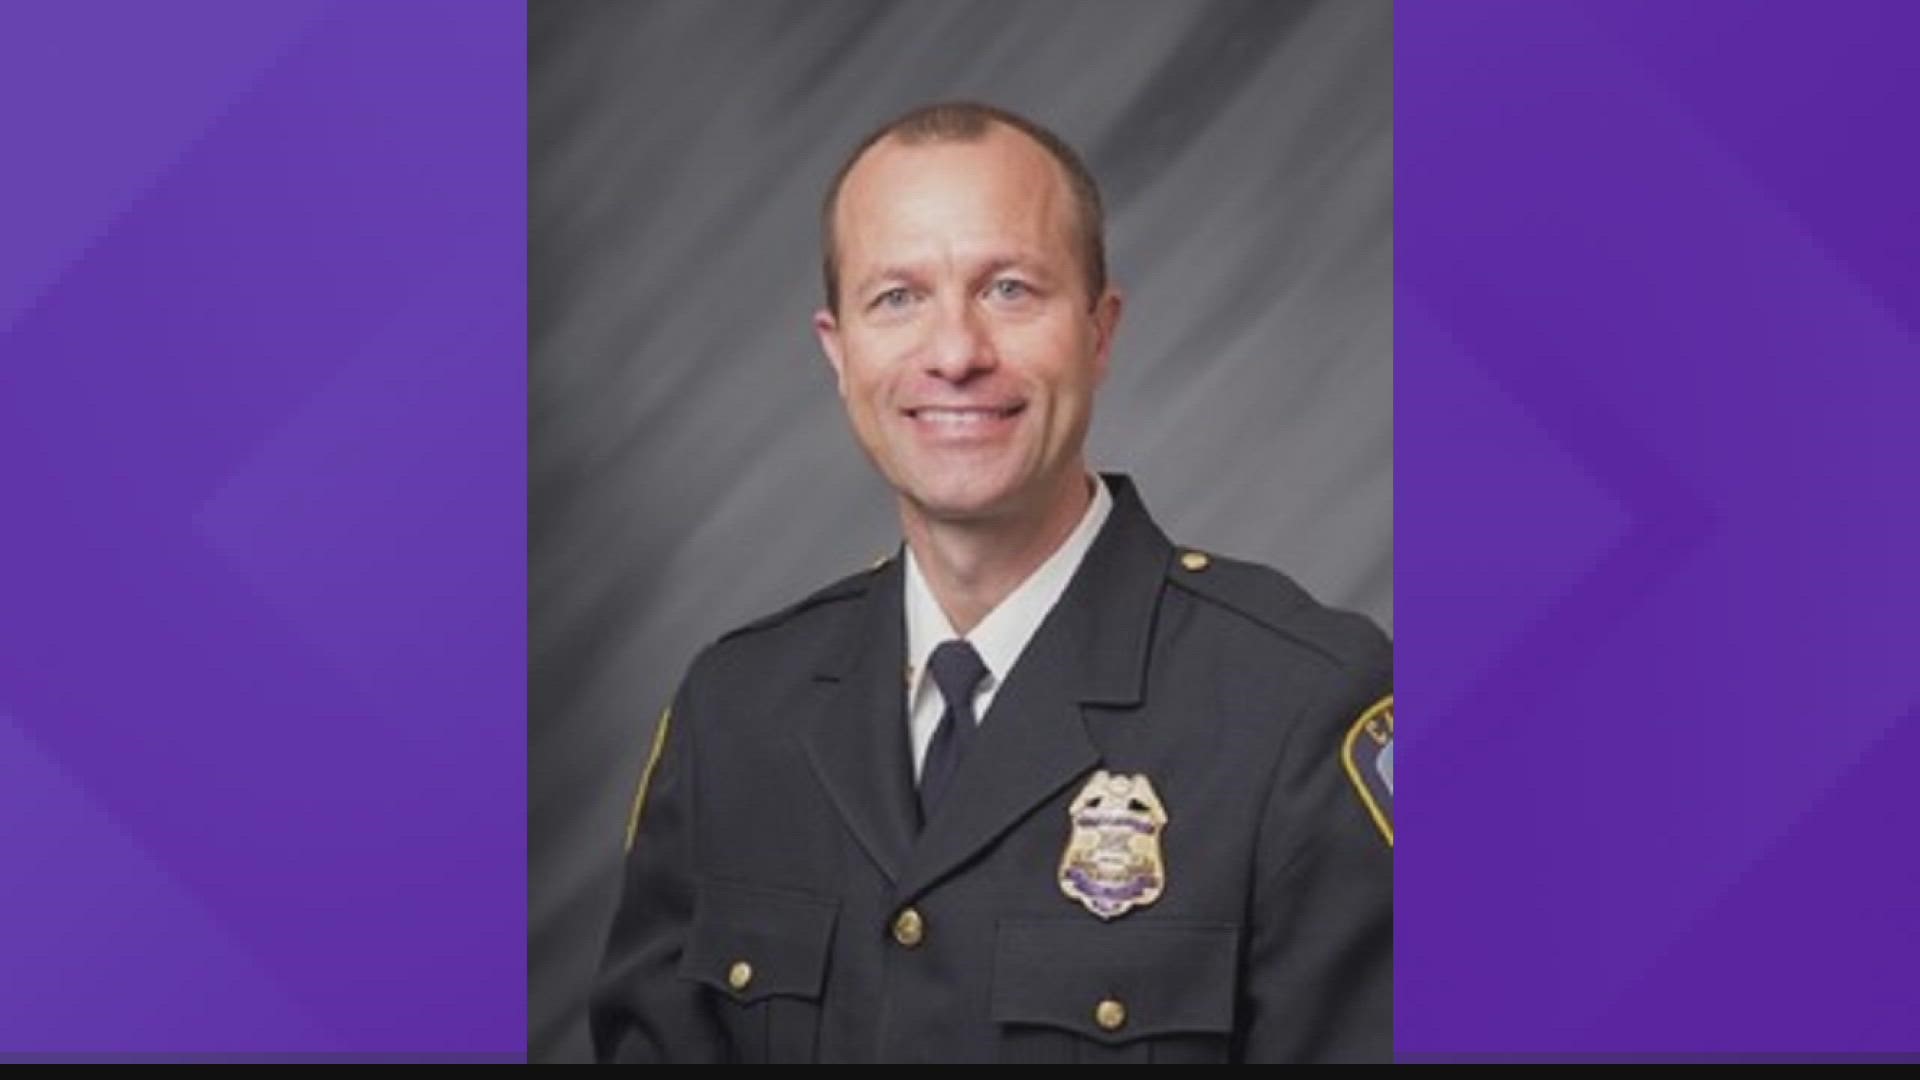 The move follows Horner removing Deputy Police Chief Joe Bickel last week for multiple allegations of misconduct.